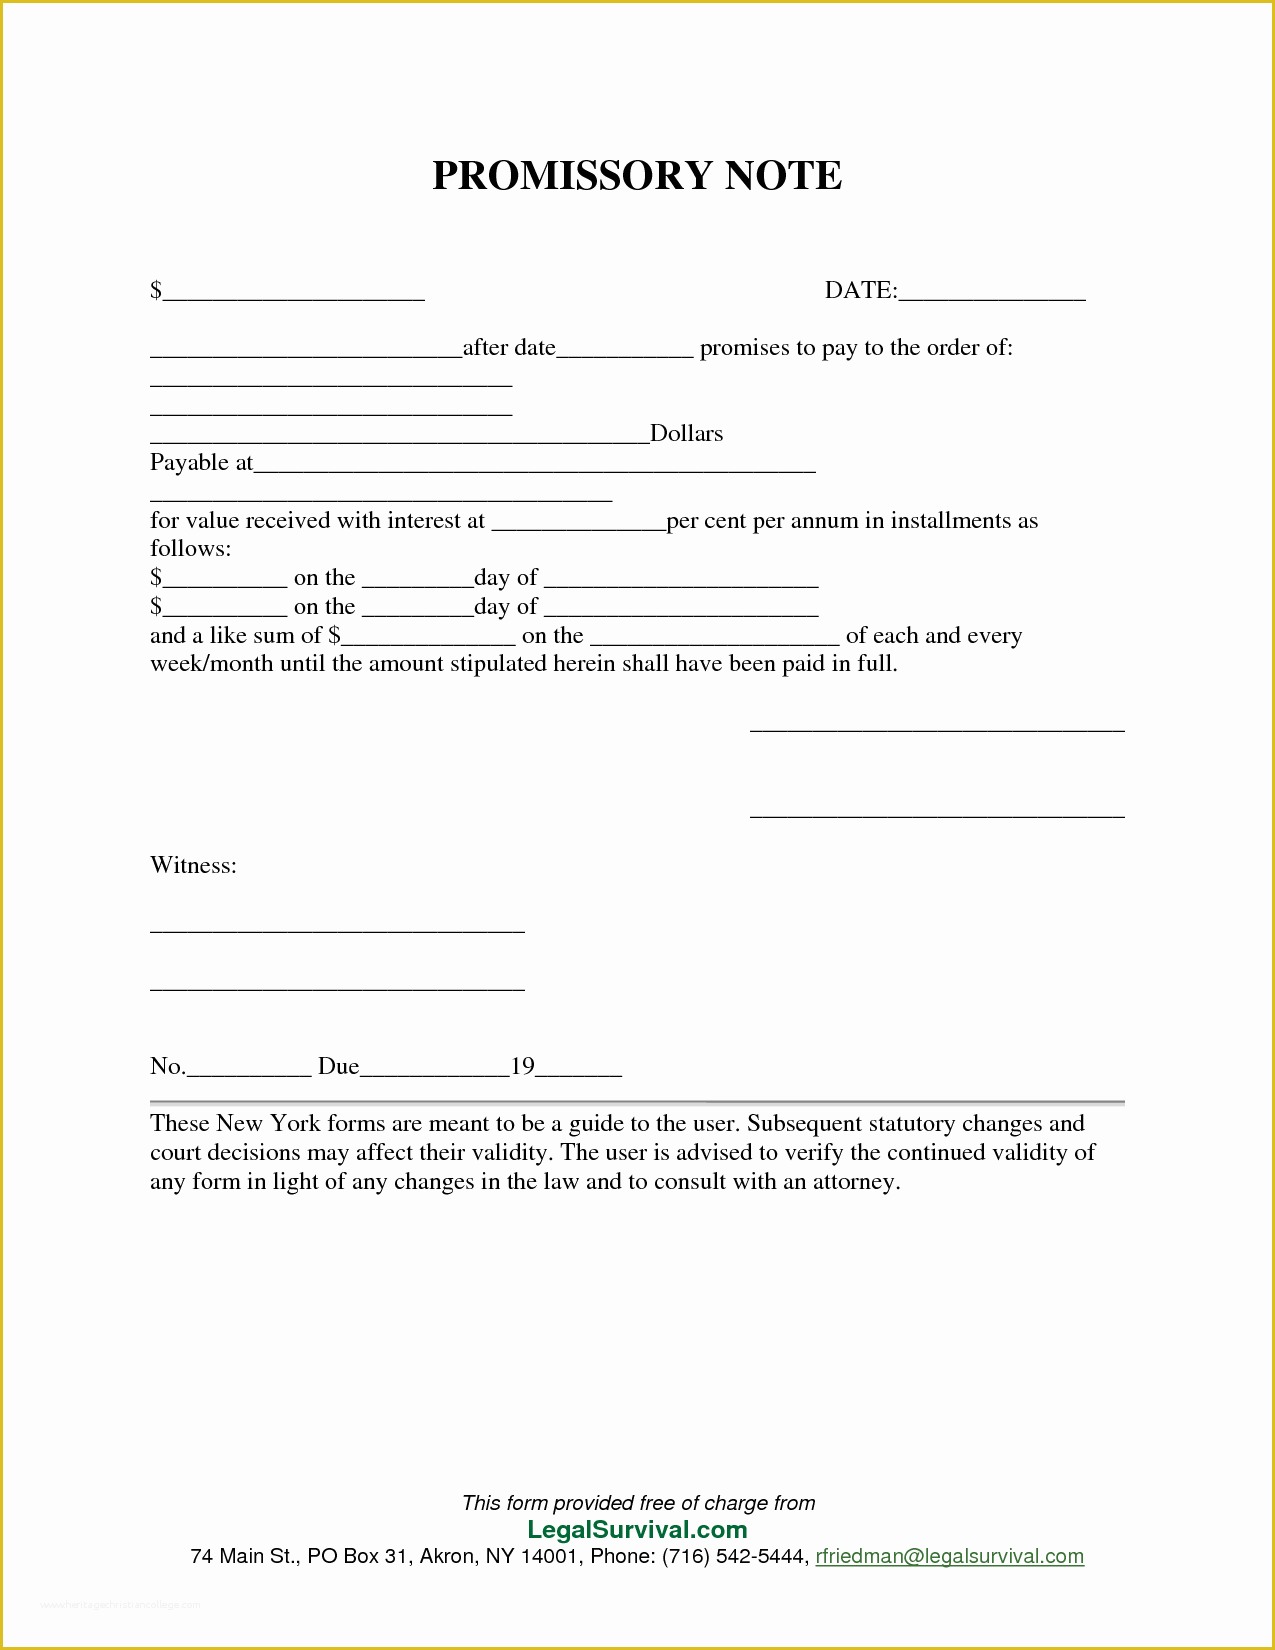 Free Promissory Note Template Of Permalink to Free Promissory Note Template …